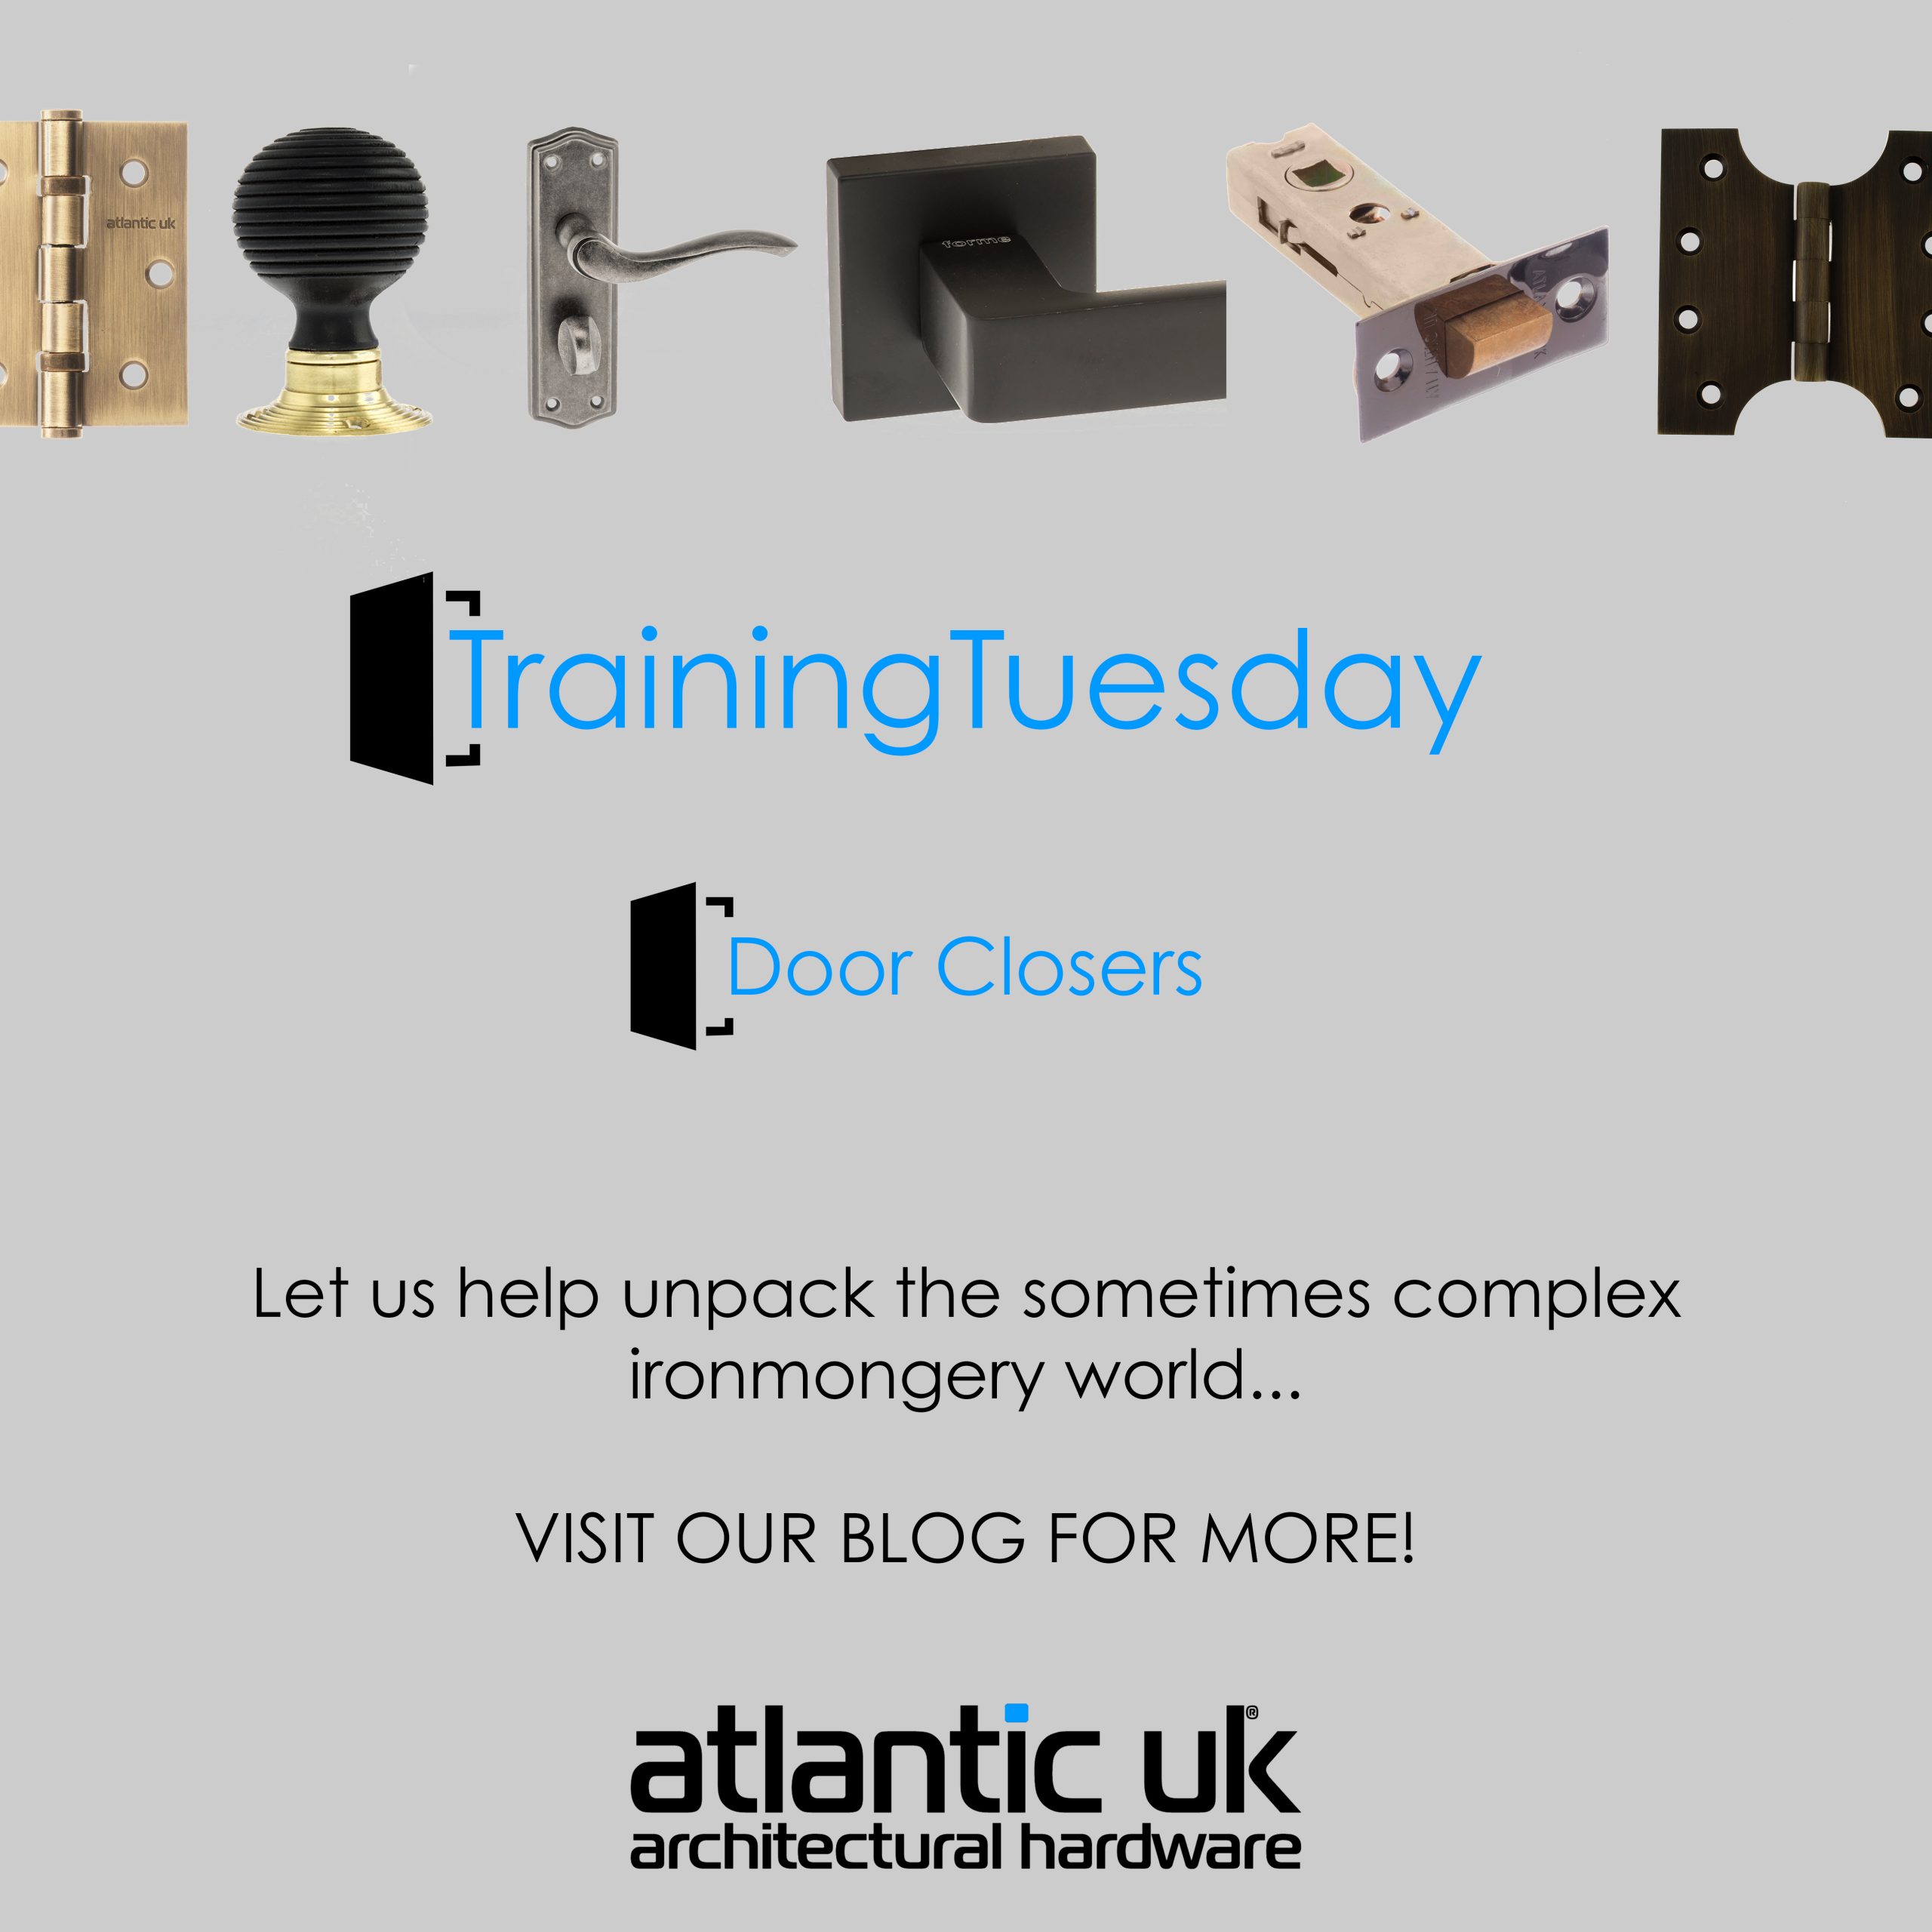 Training Tuesday!  Learn about Door Closers!